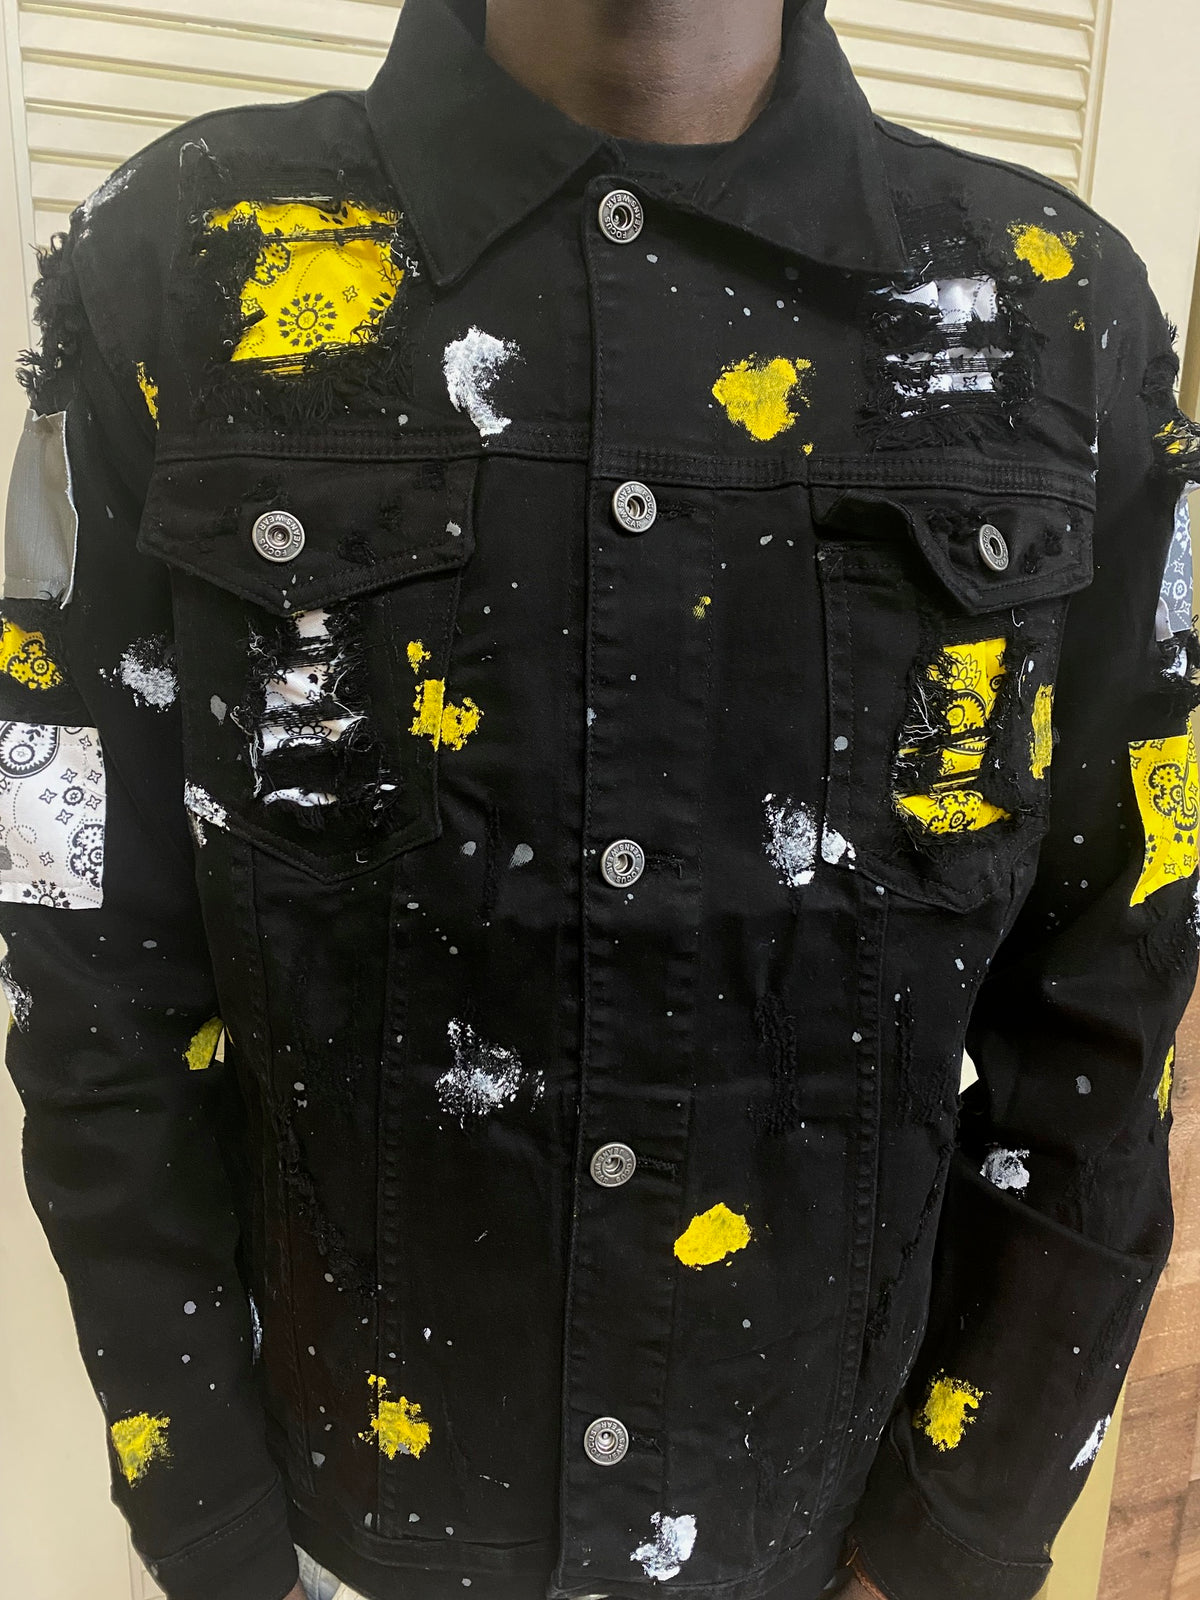 Focus - Spotted Ripped Denim Jacket - Black/Yellow